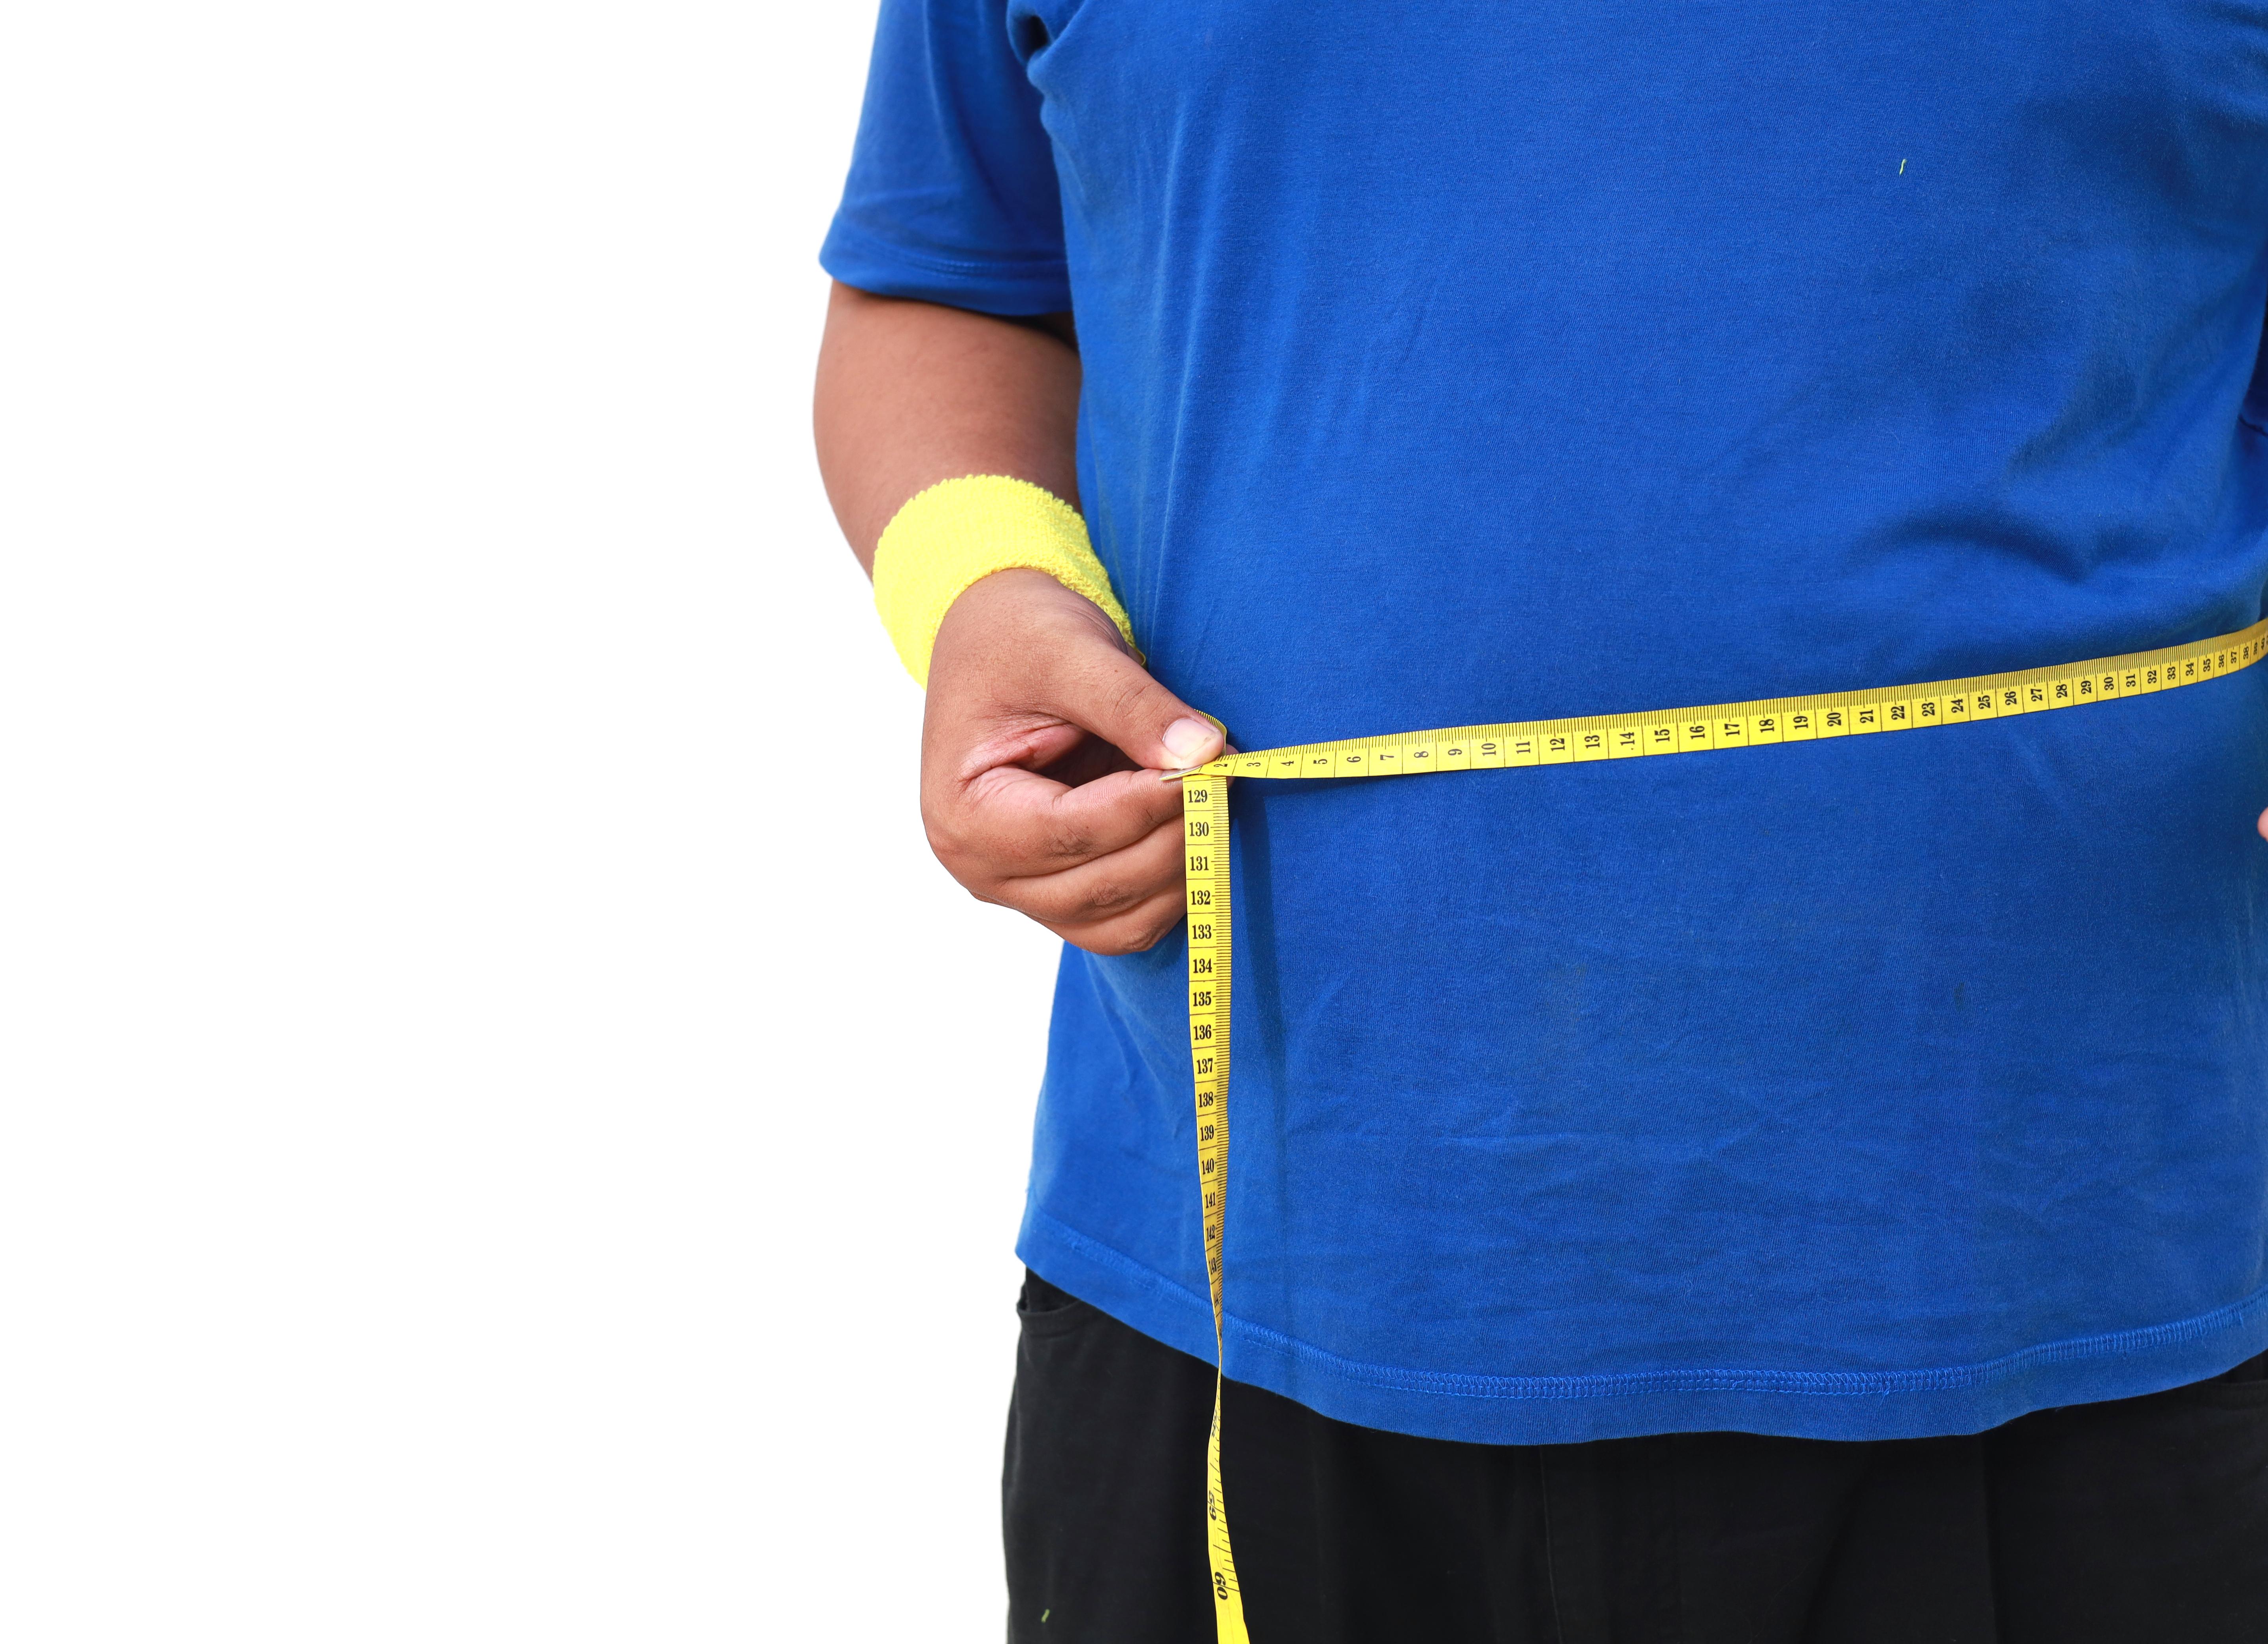 Find out whether you have any of the metabolic syndrome's symptoms.